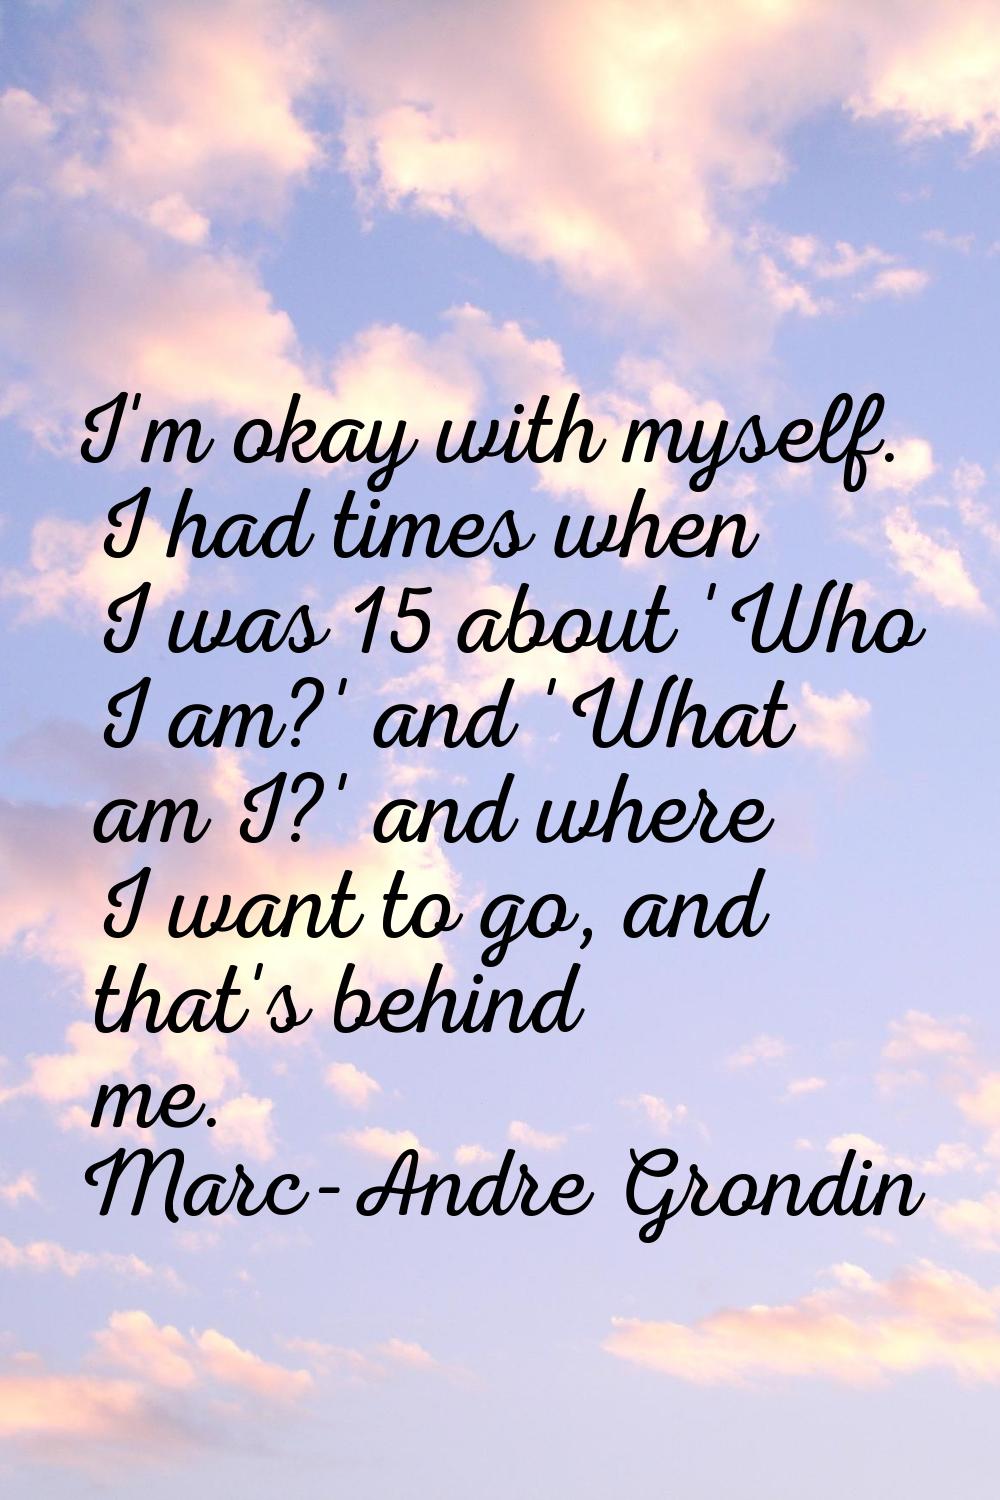 I'm okay with myself. I had times when I was 15 about 'Who I am?' and 'What am I?' and where I want